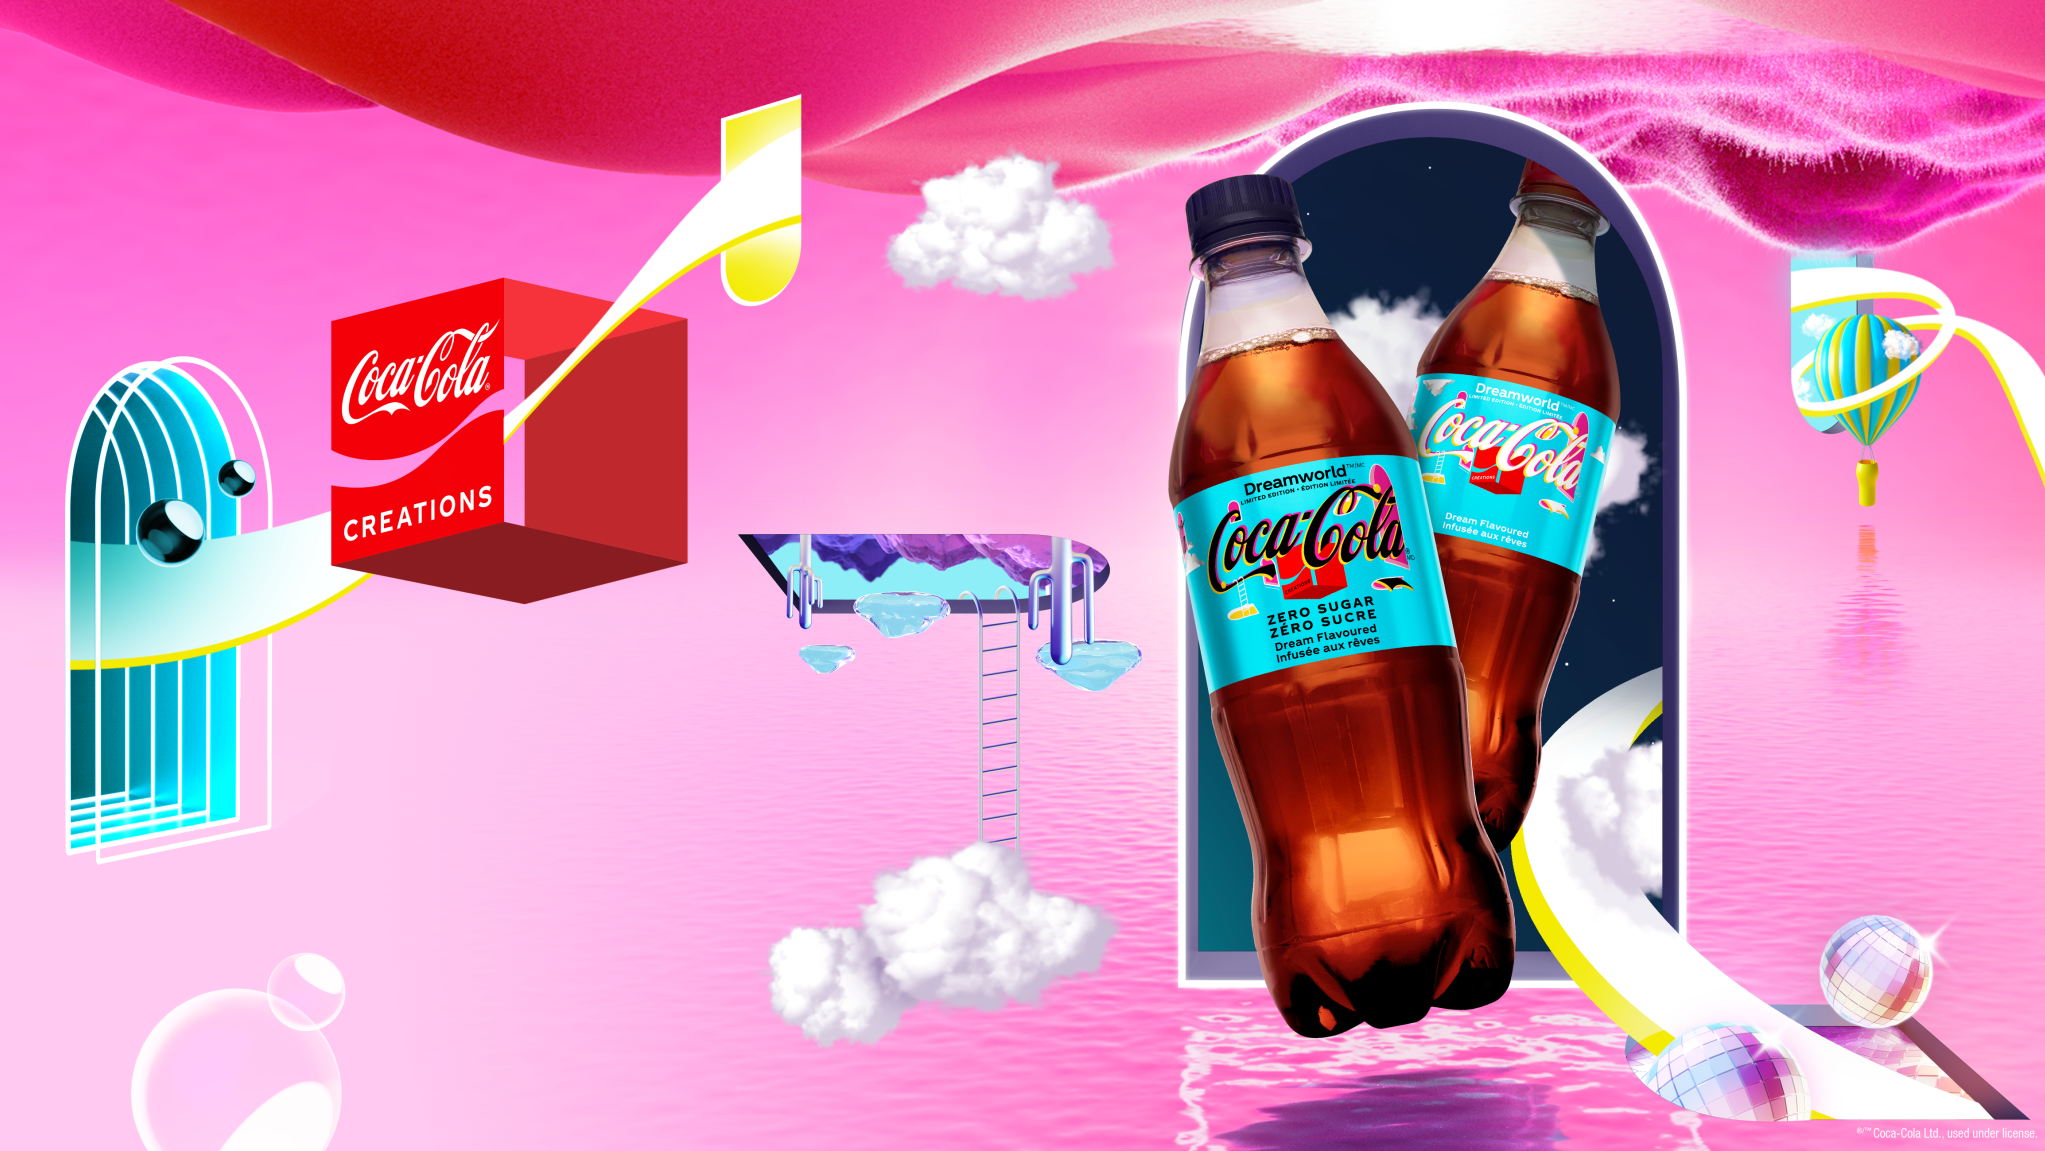 Coca-Cola’s Latest Creations Flavor Inspired By Dreams and the Surreal